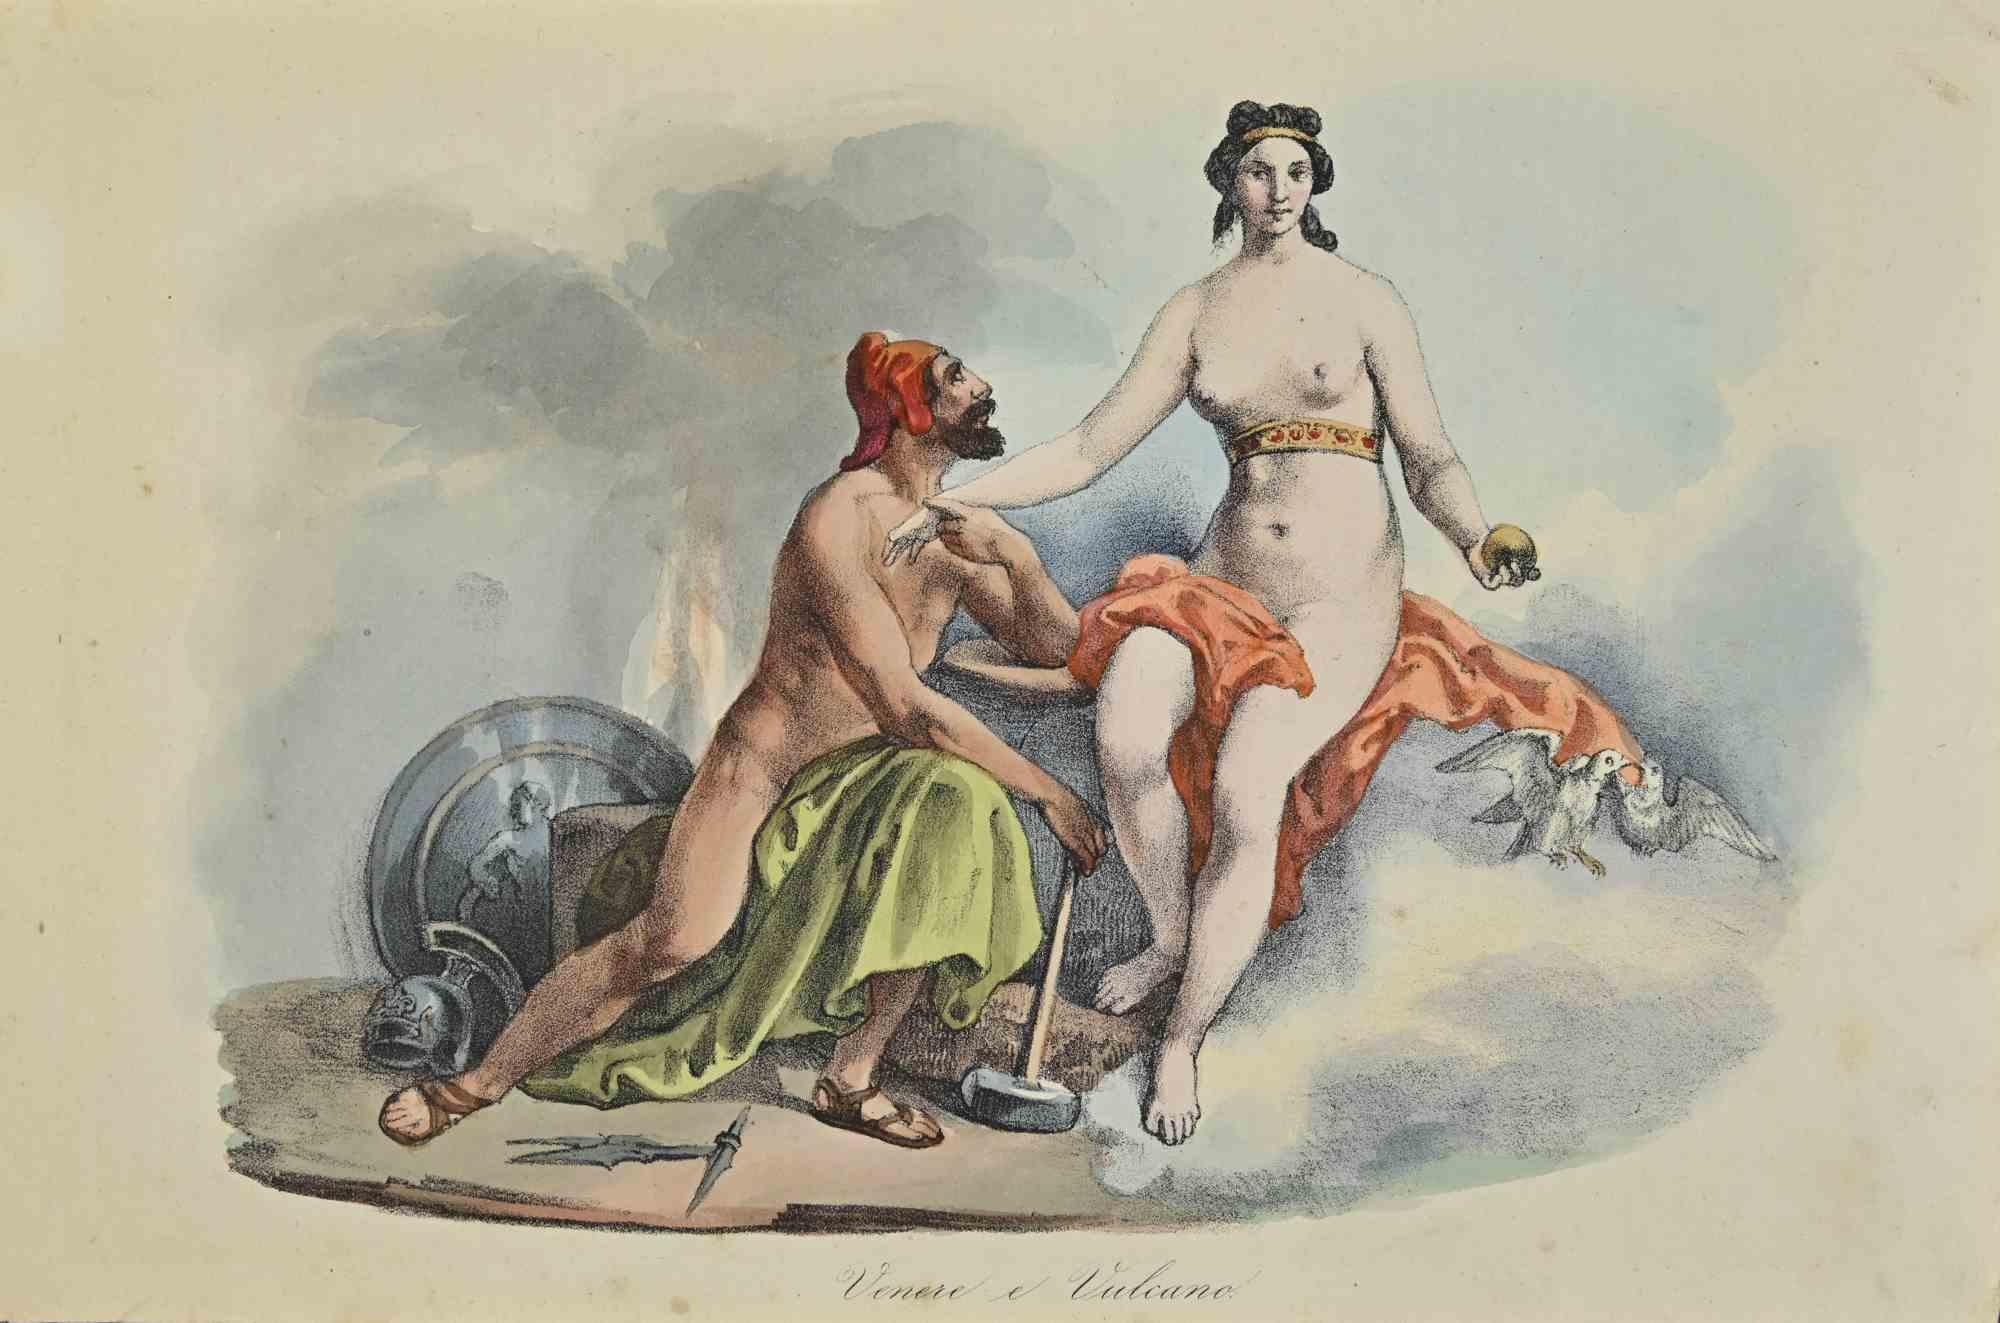 Various Artists Figurative Print - Uses and Customs - Venus - Lithograph - 1862